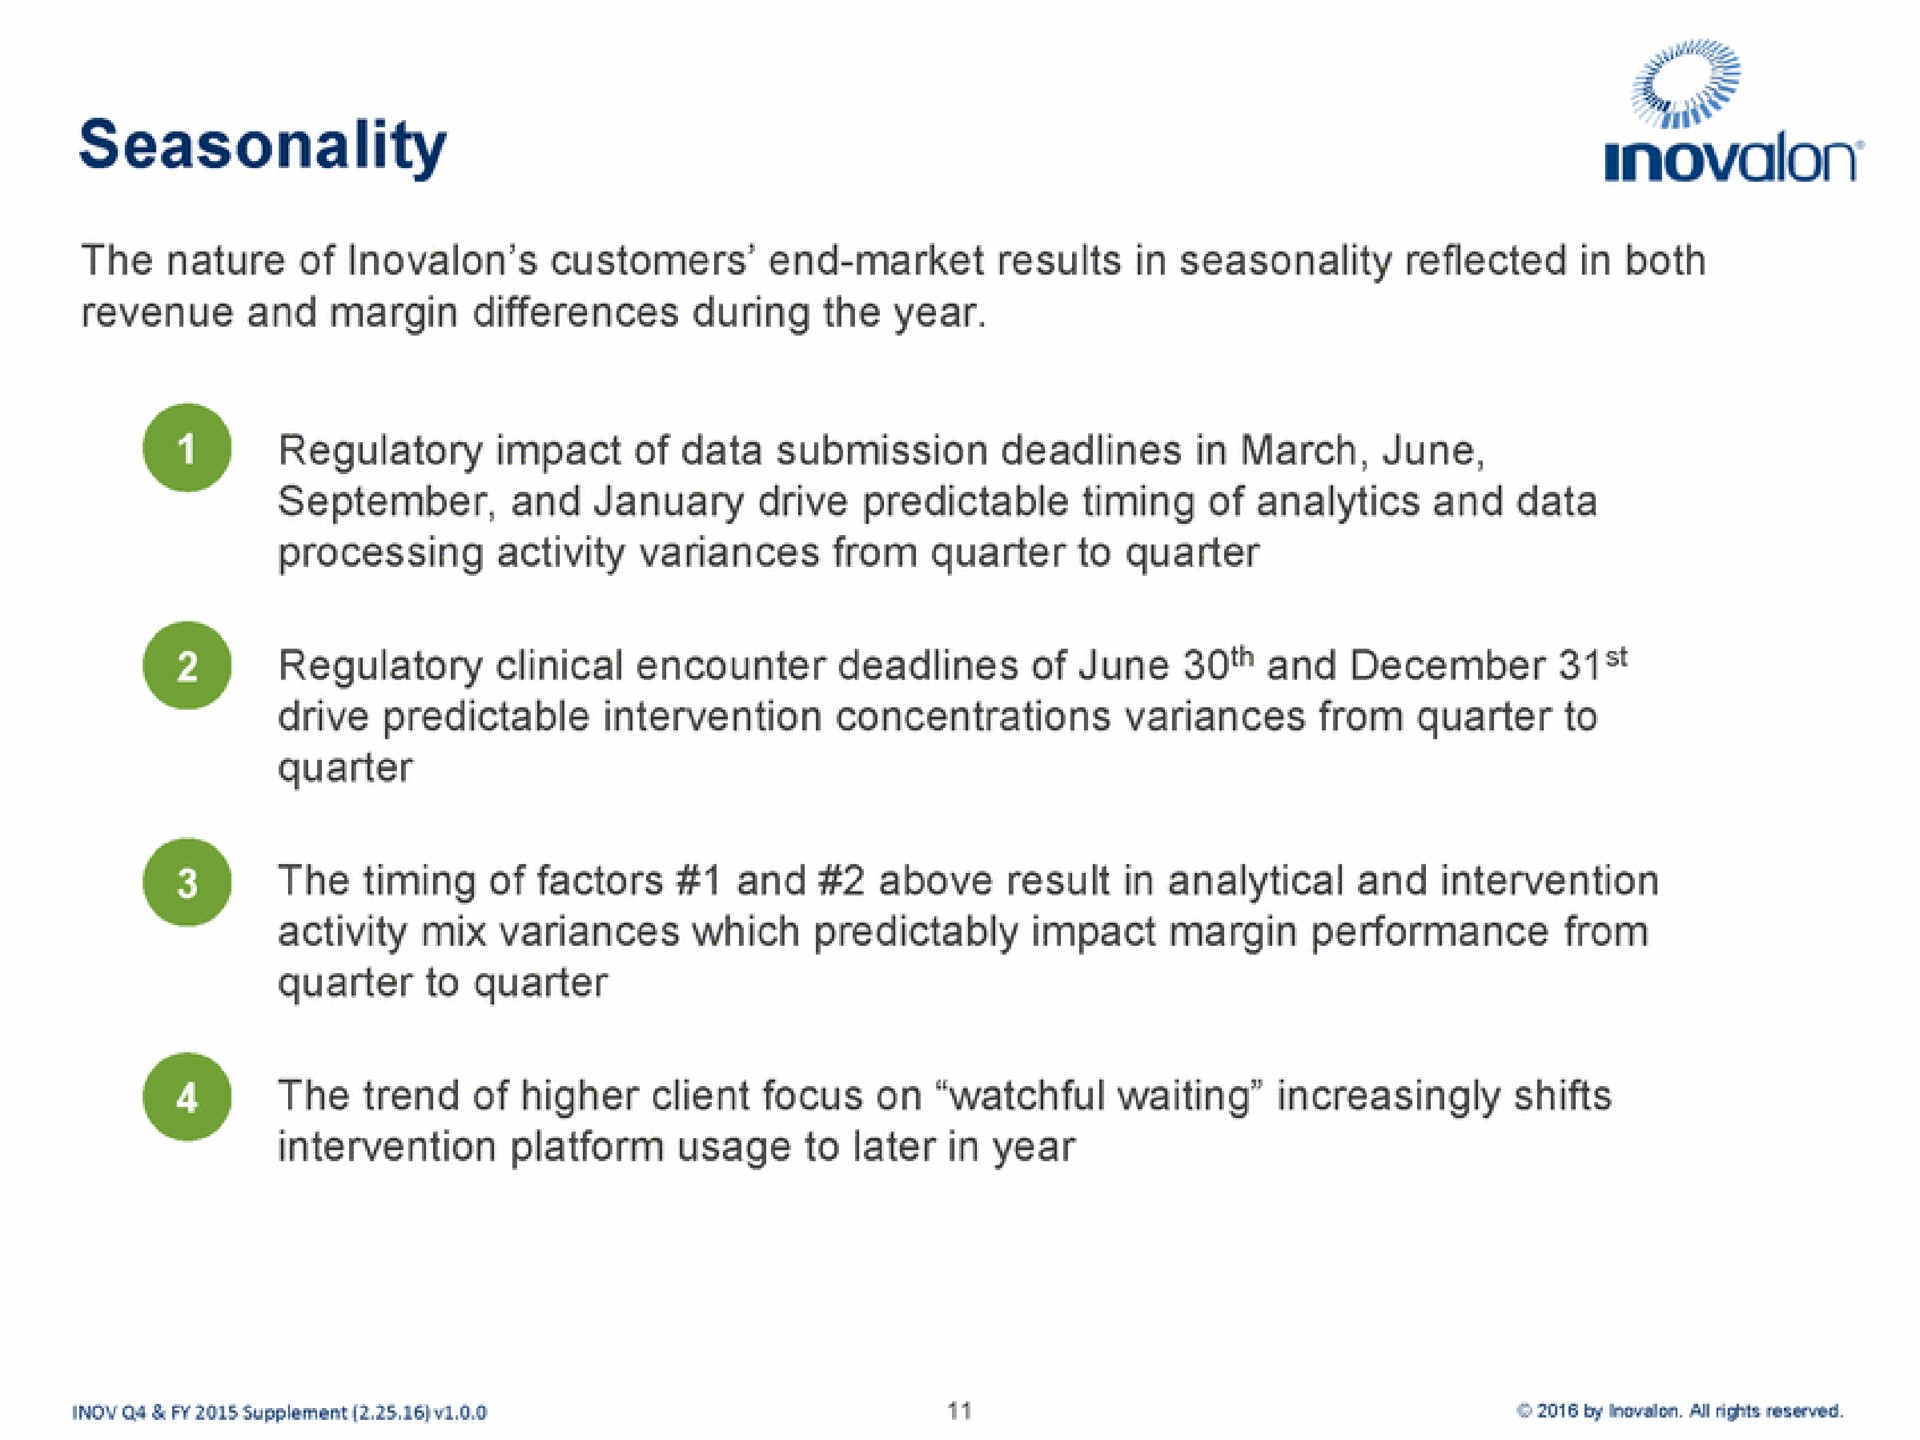 seasonality the timing of factors and above result in analytical and intervention | Inovalon